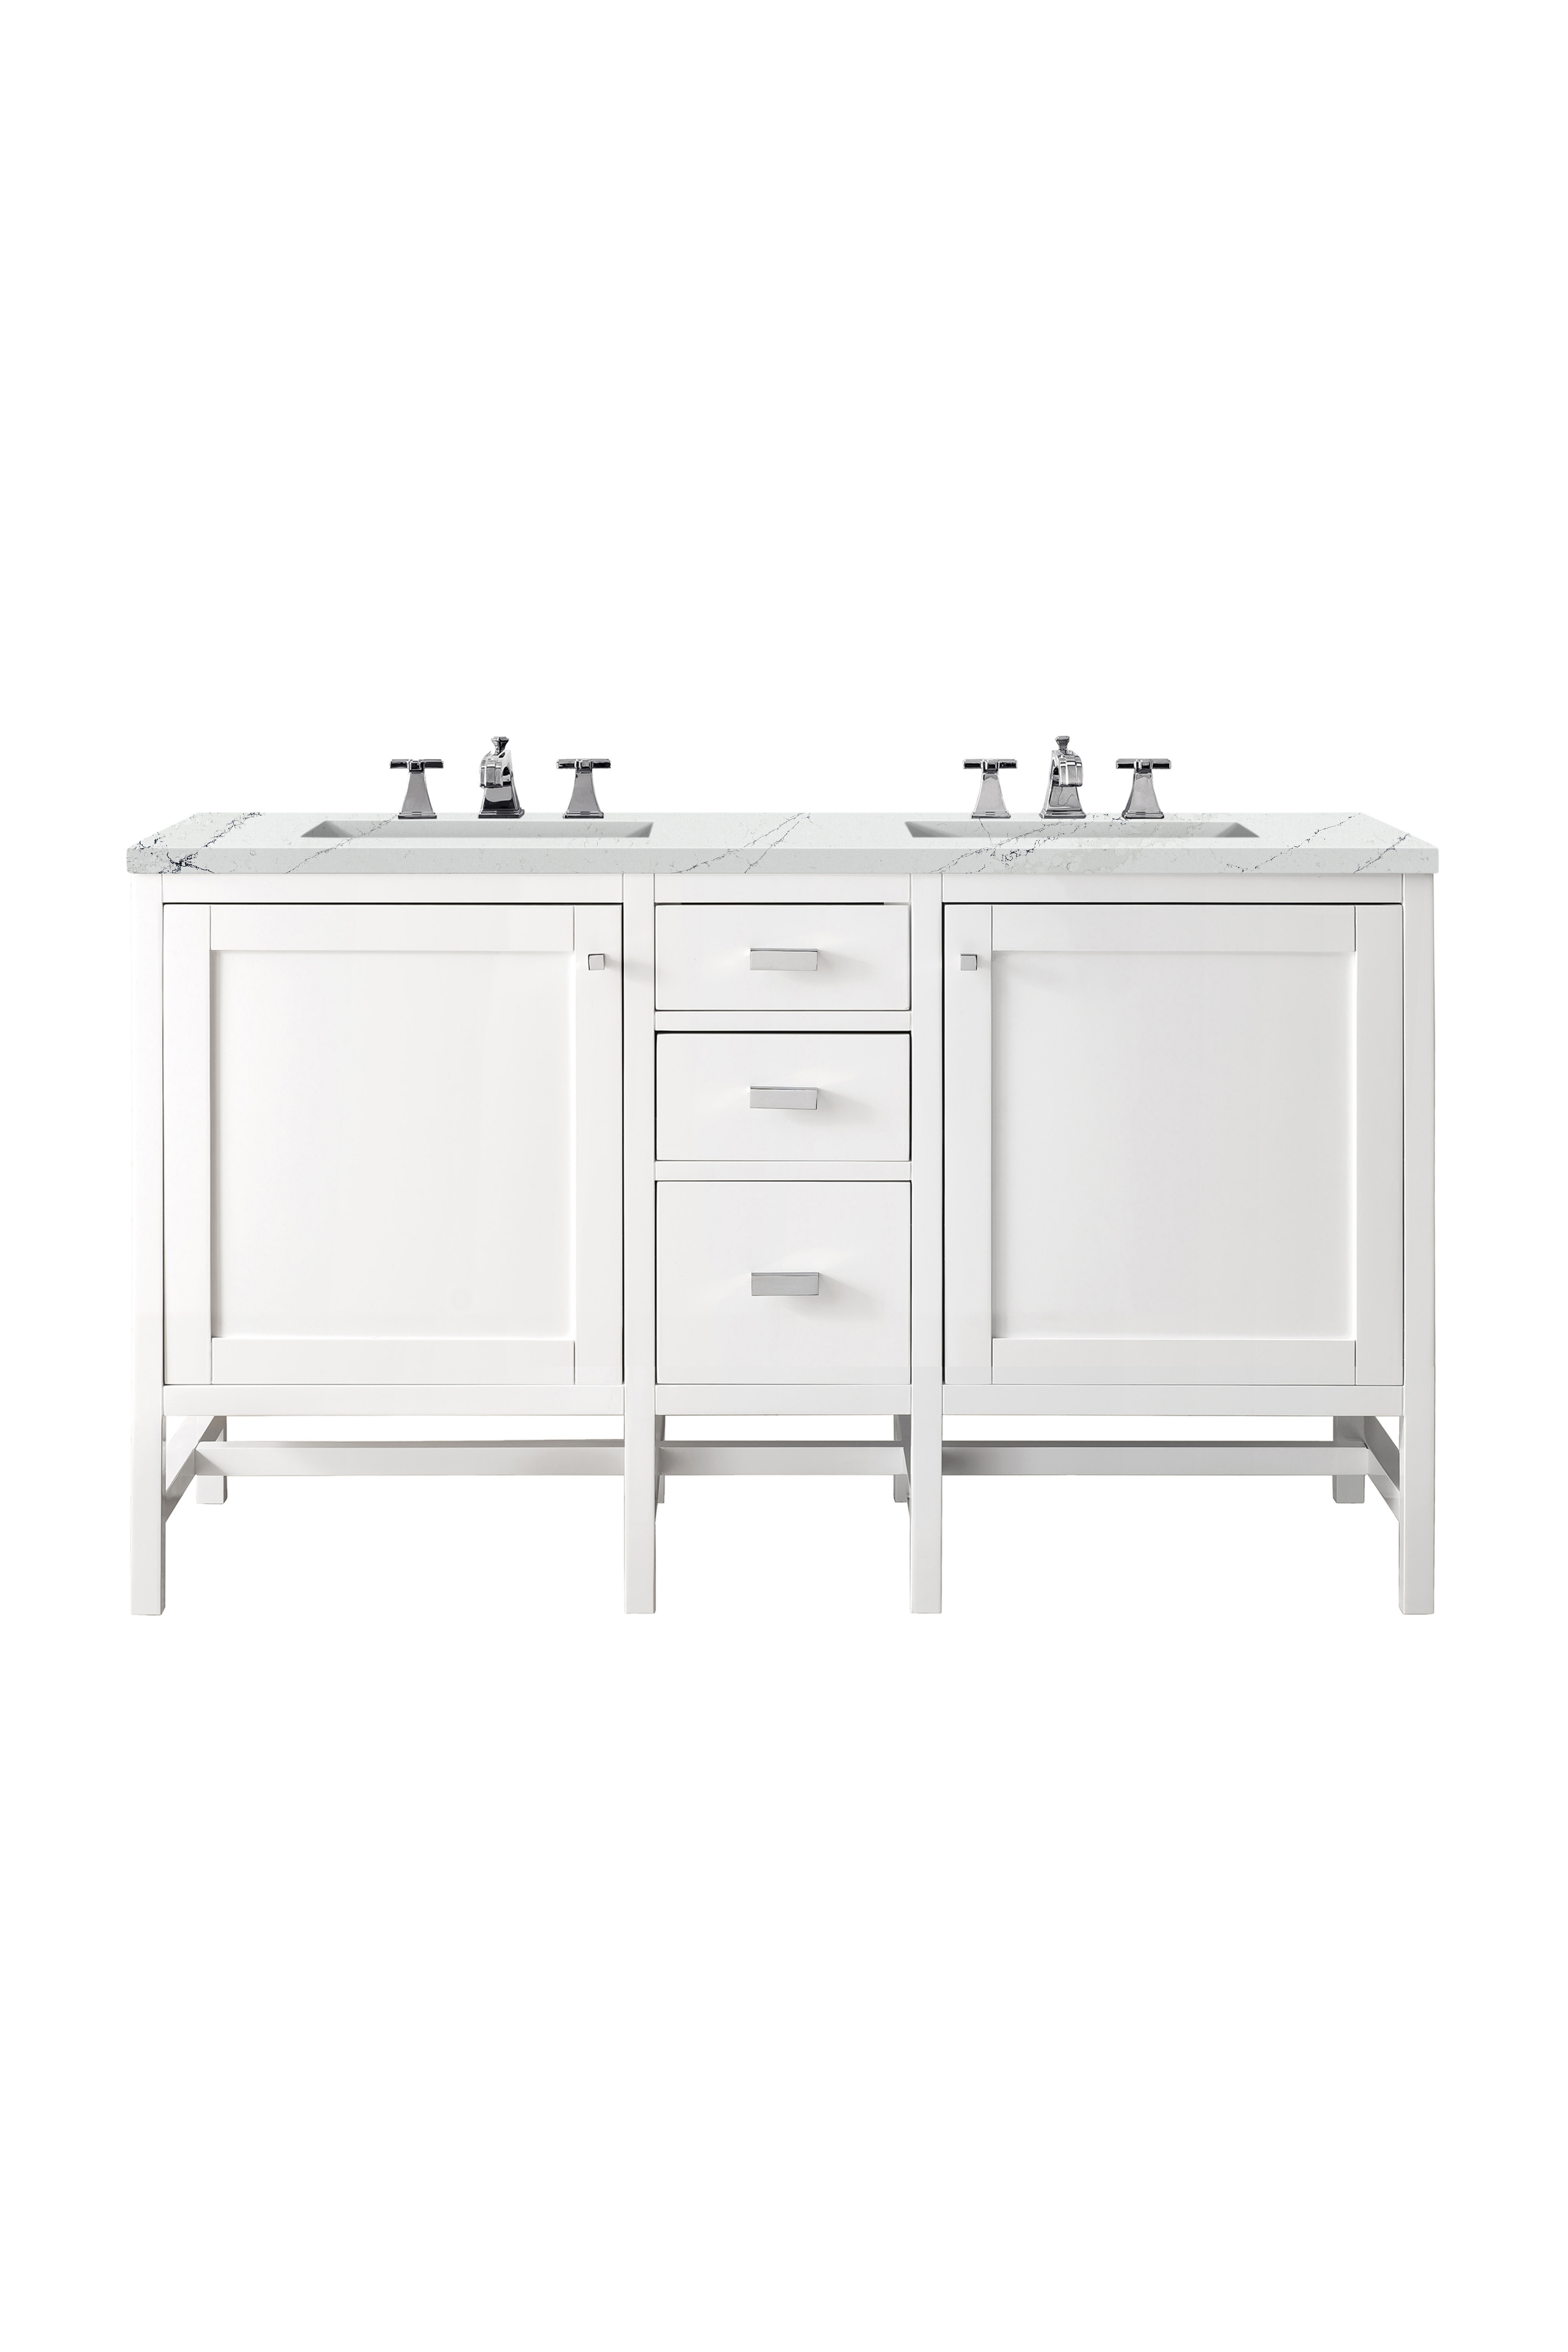 James Martin E444-V60D-GW-3ENC Addison 60" Double Vanity Cabinet, Glossy White, w/ 3 CM Ethereal Noctis Top